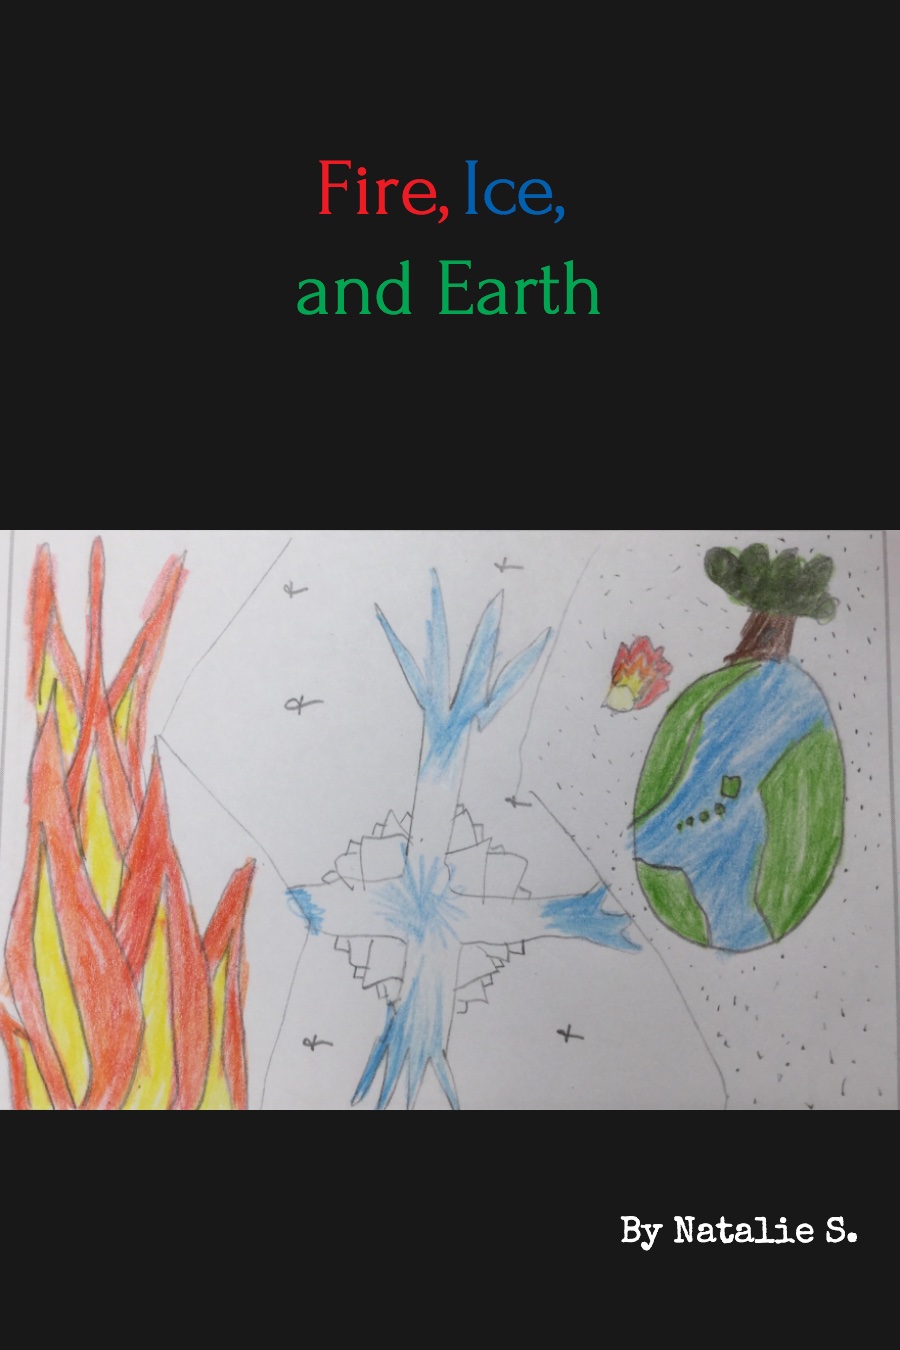 Fire Ice and Earth by Natalie S (1)